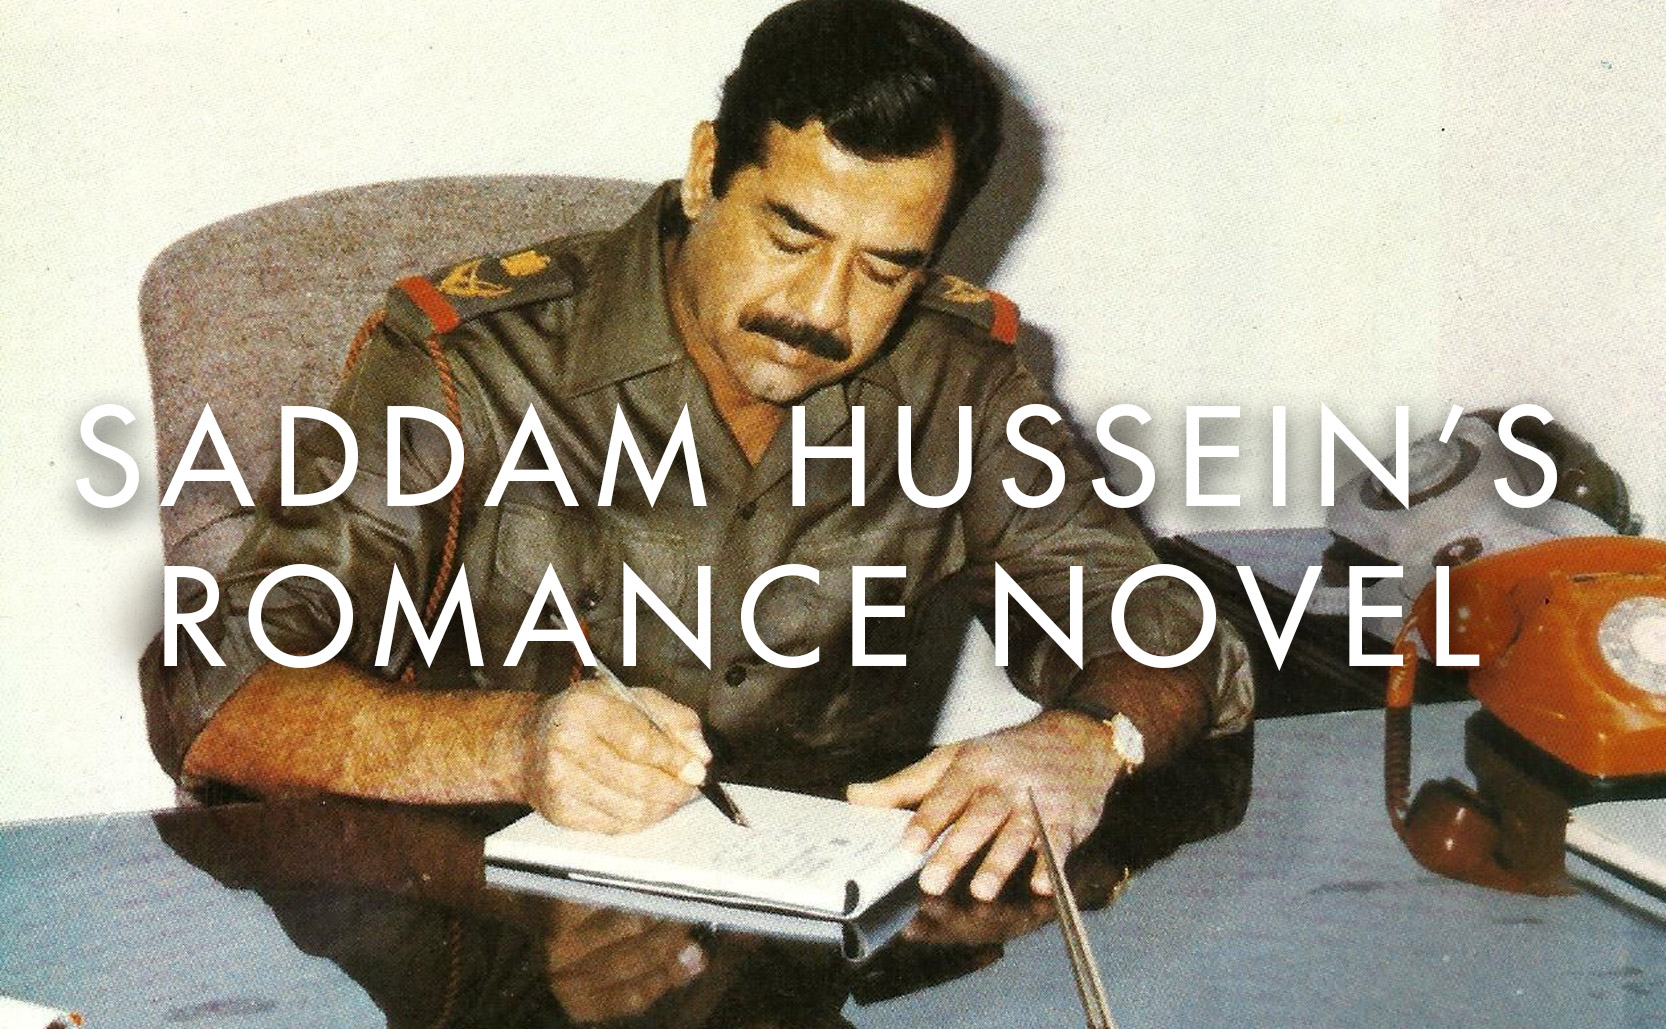 You are currently viewing Saddam Hussein’s Romance Novel